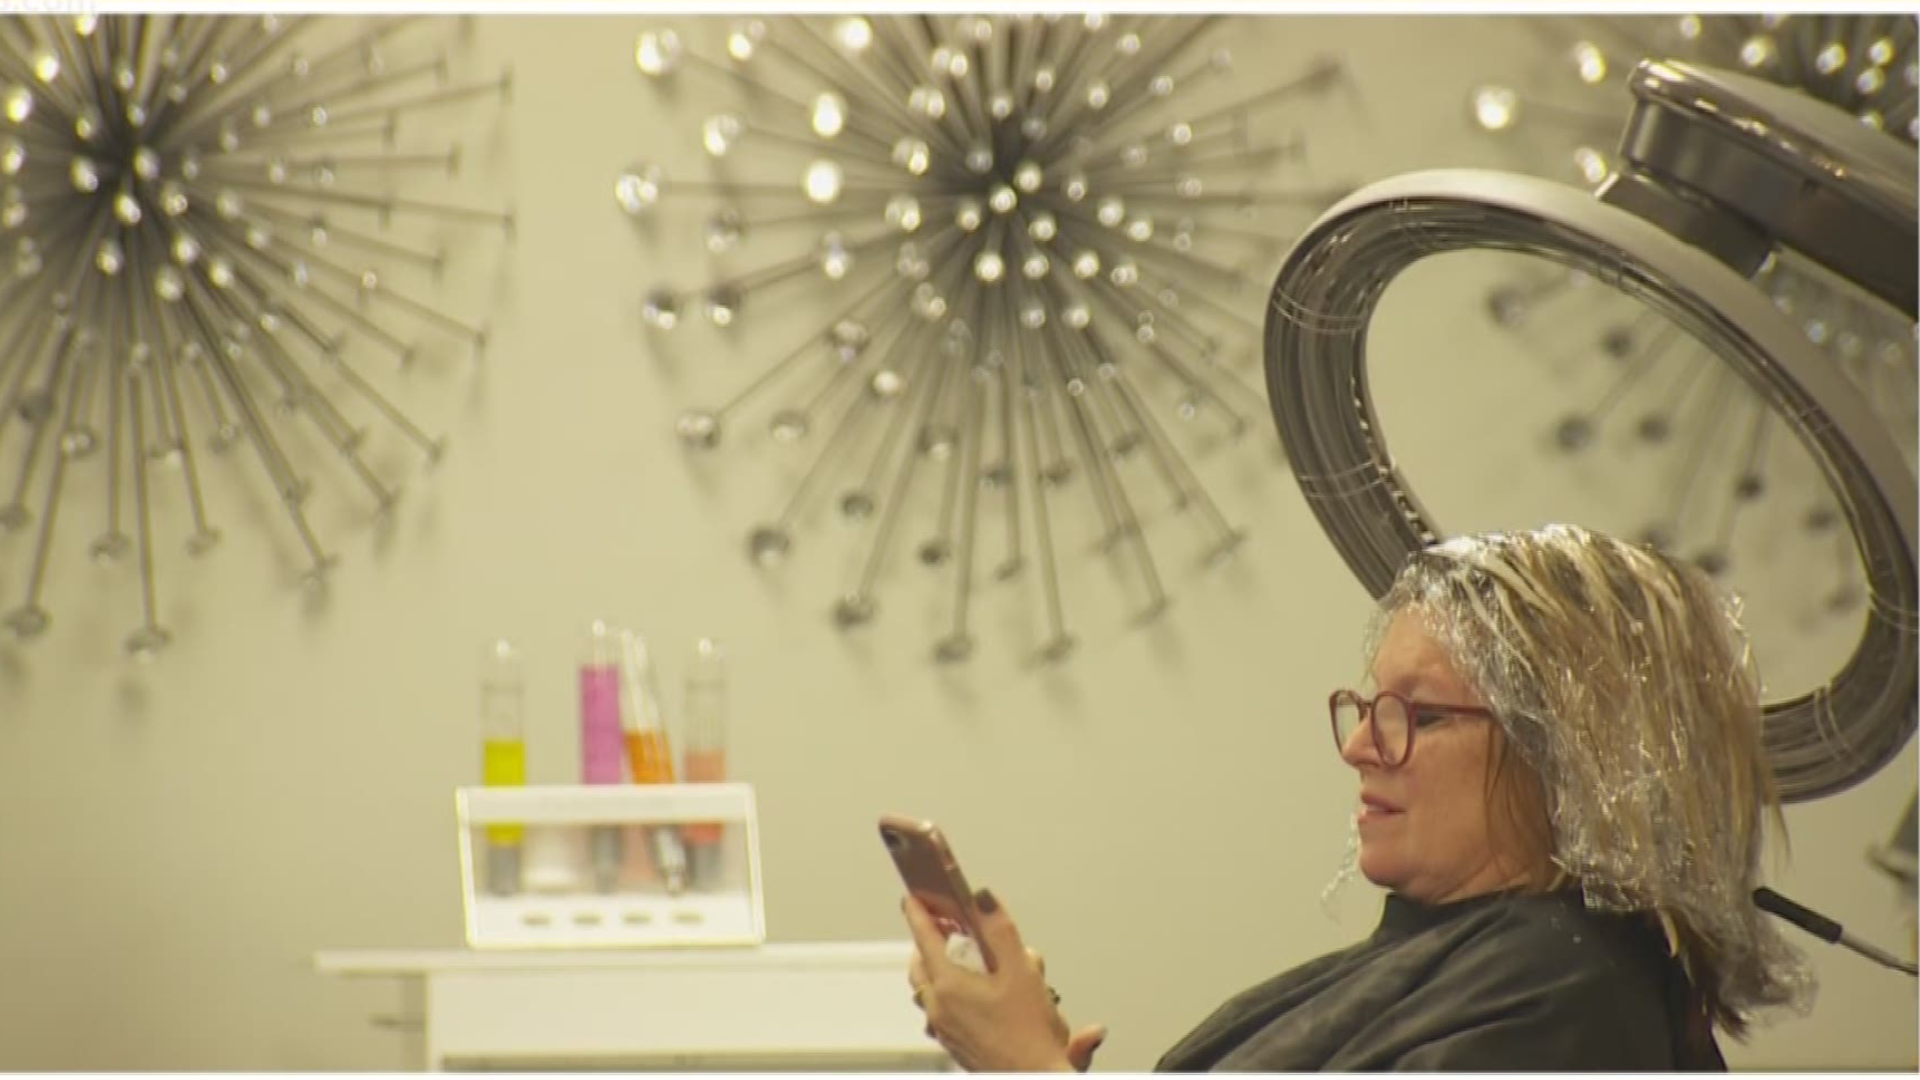 A section of a bill that would have banned booth renting in a salon was dropped. We look into concerns from hairstylists and hear from the bill's sponsor, Sen. Karen Keiser.